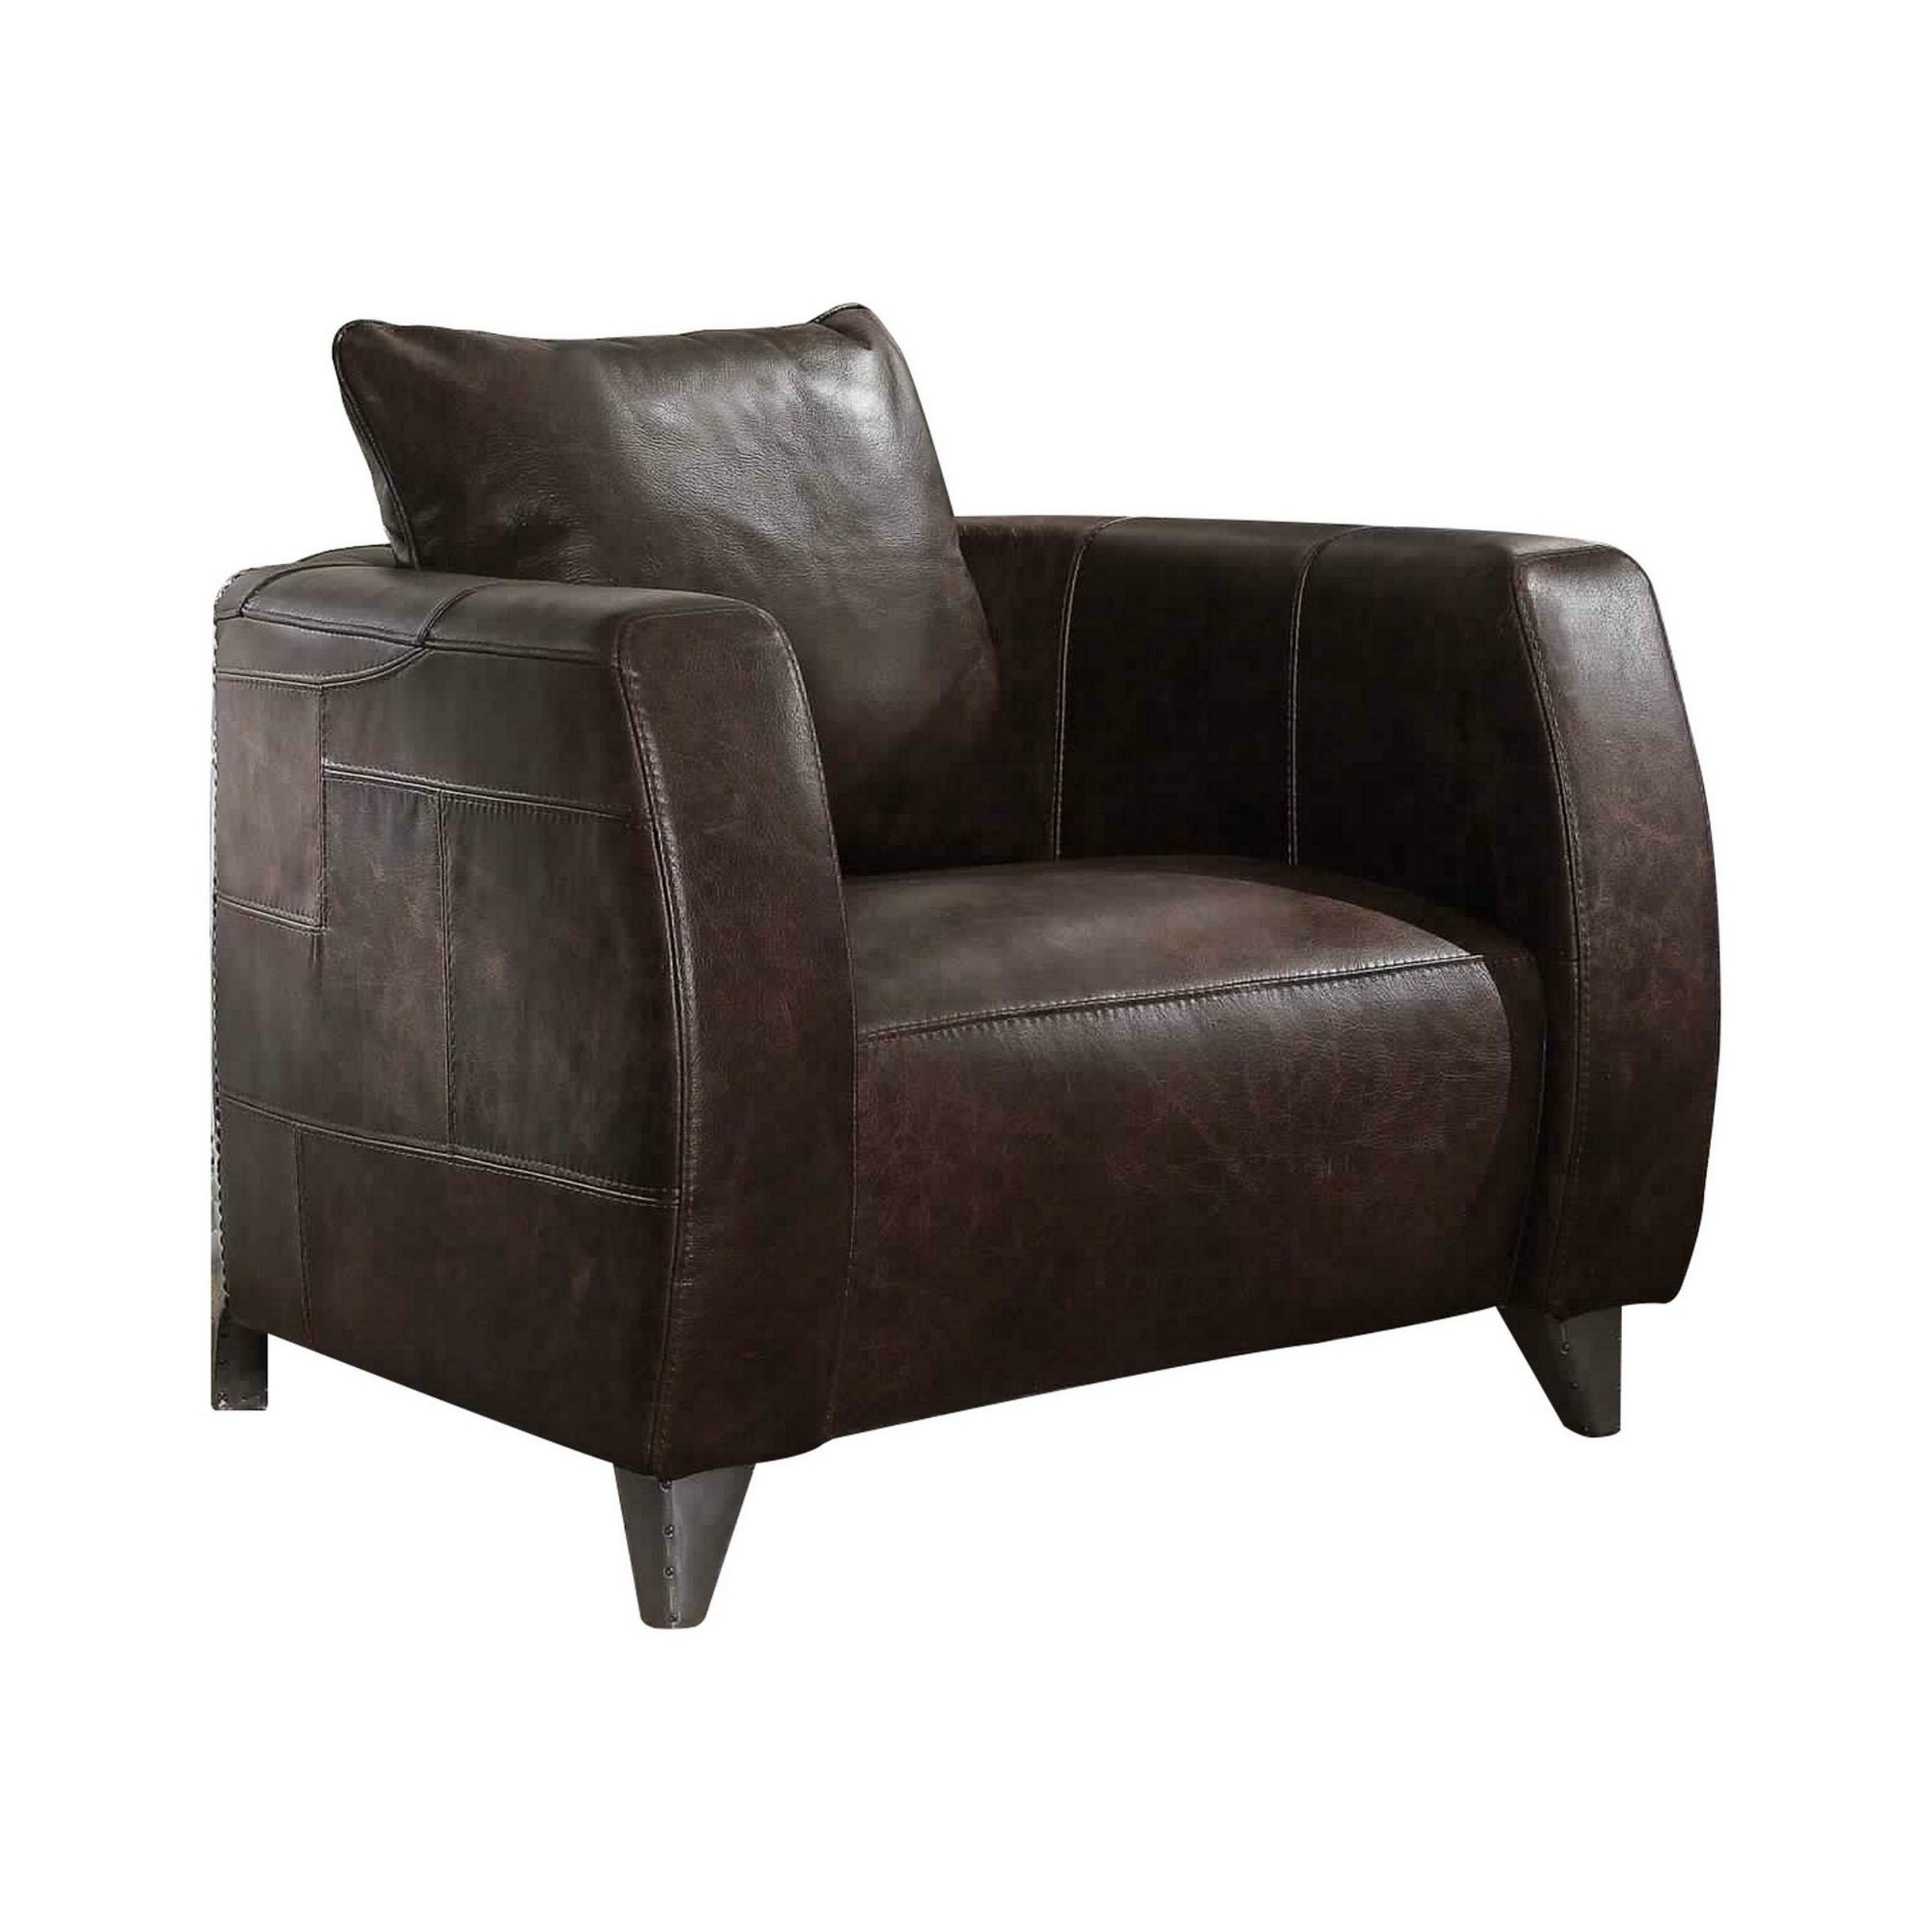 Jarin Faux Leather Armchairs Intended For 2019 Smoak 37" W Faux Leather Armchair (View 20 of 20)